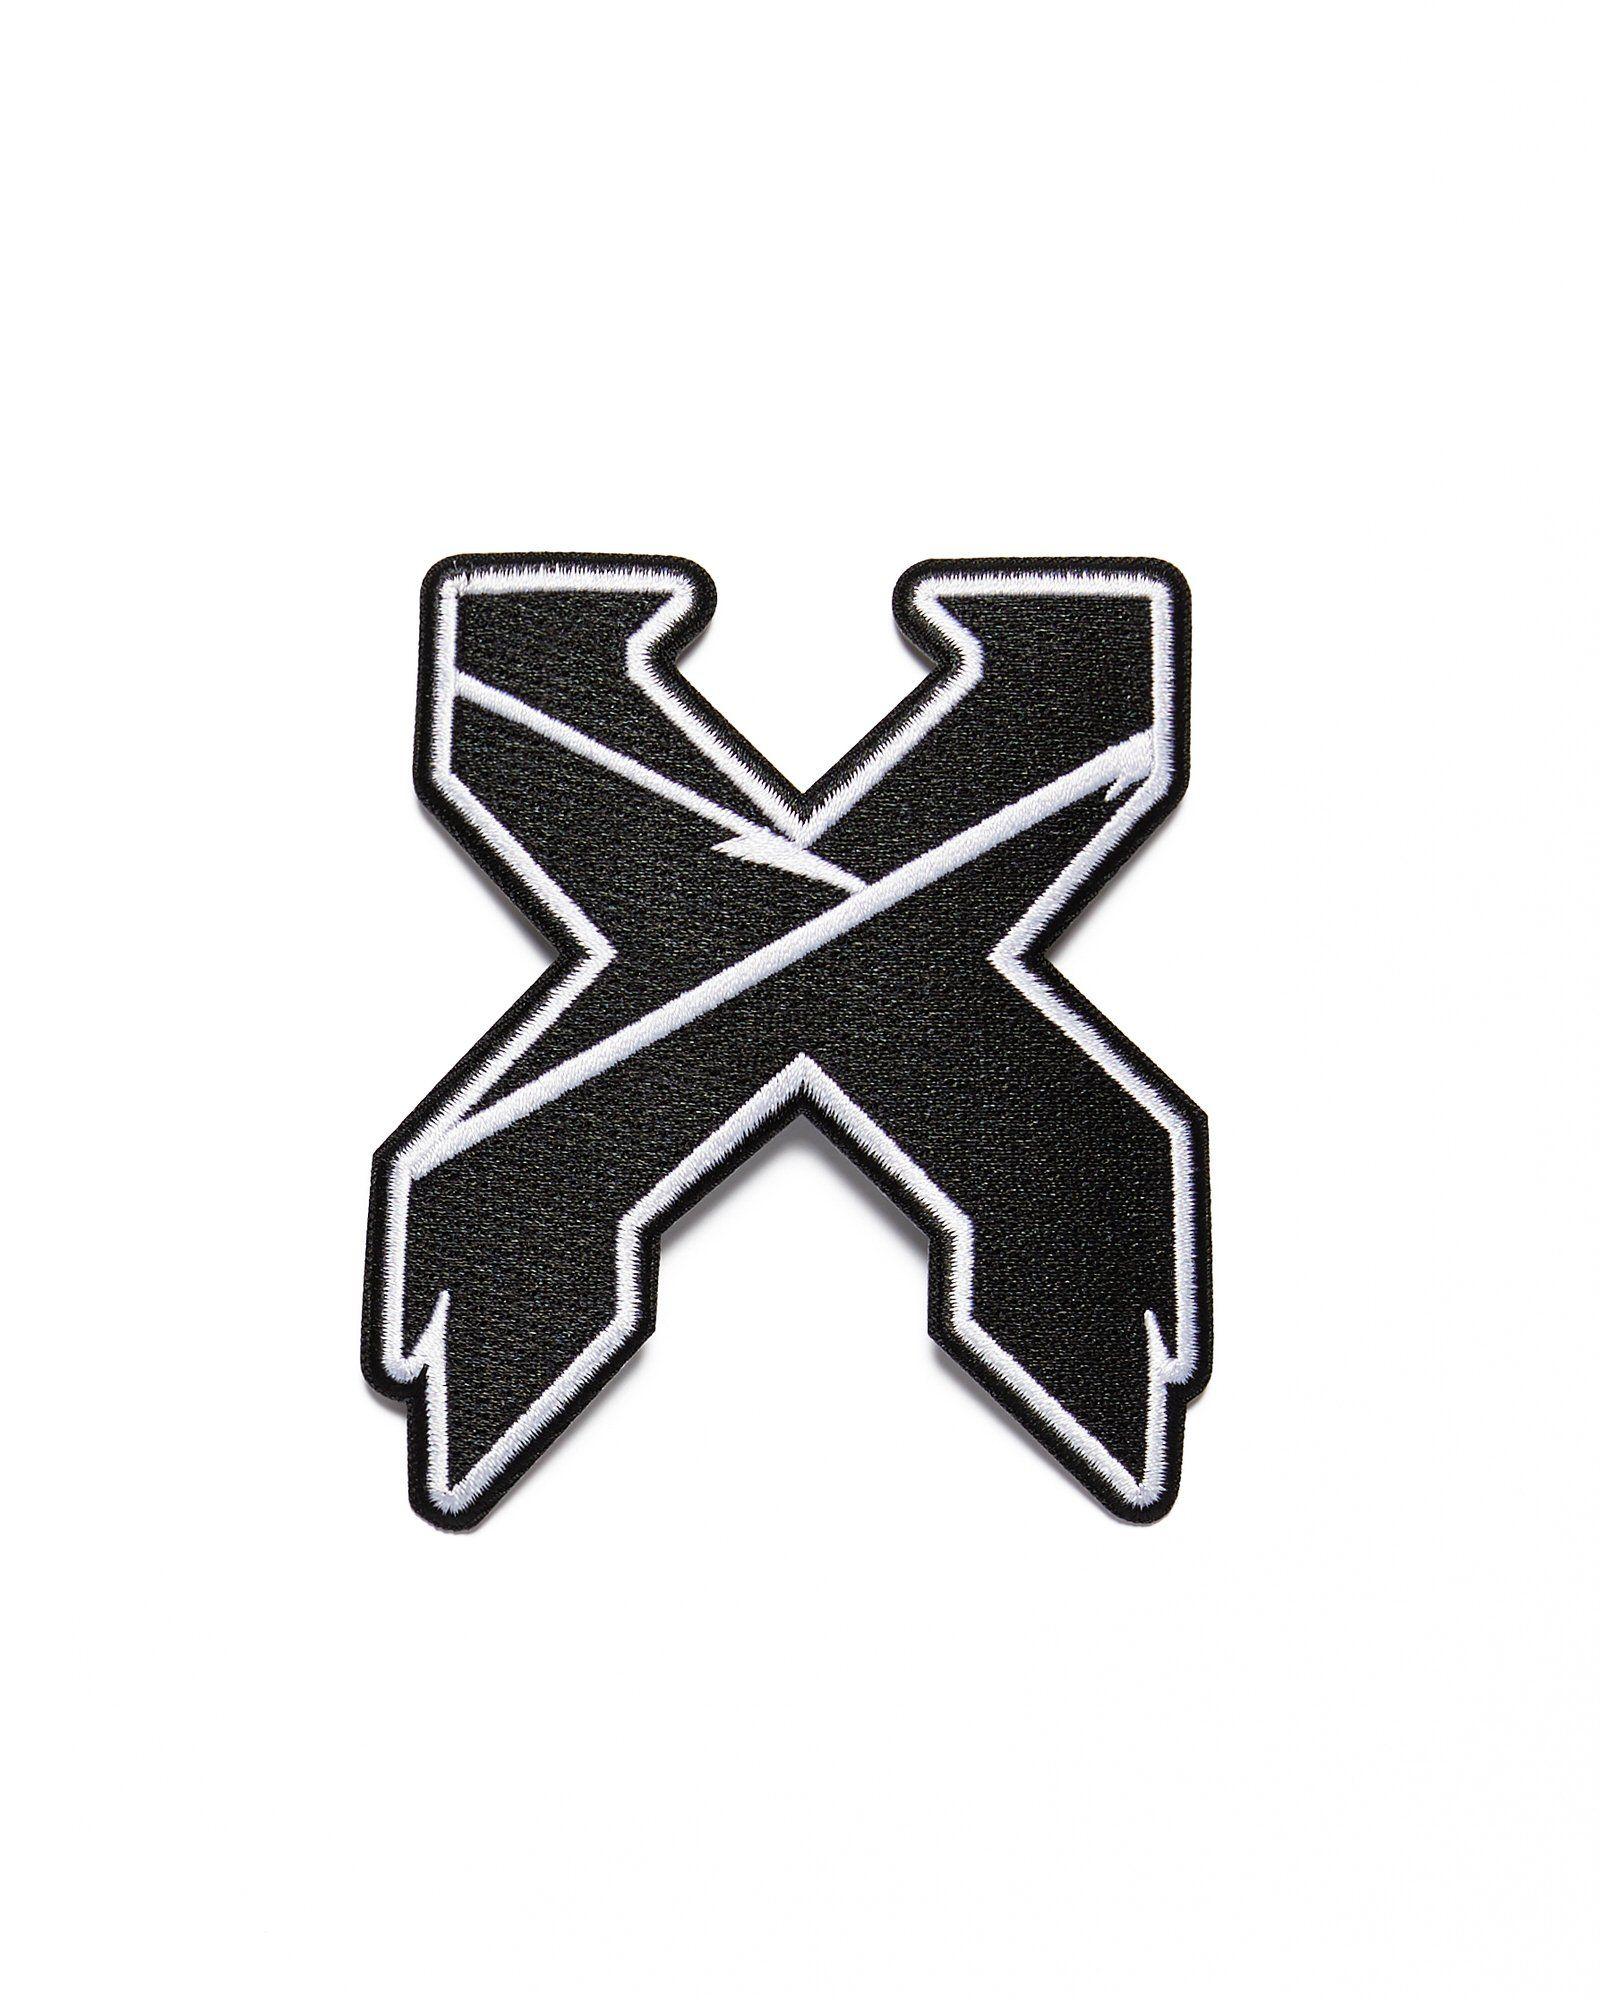 Excision Logo - Excision 'Sliced' Logo Patch - 4